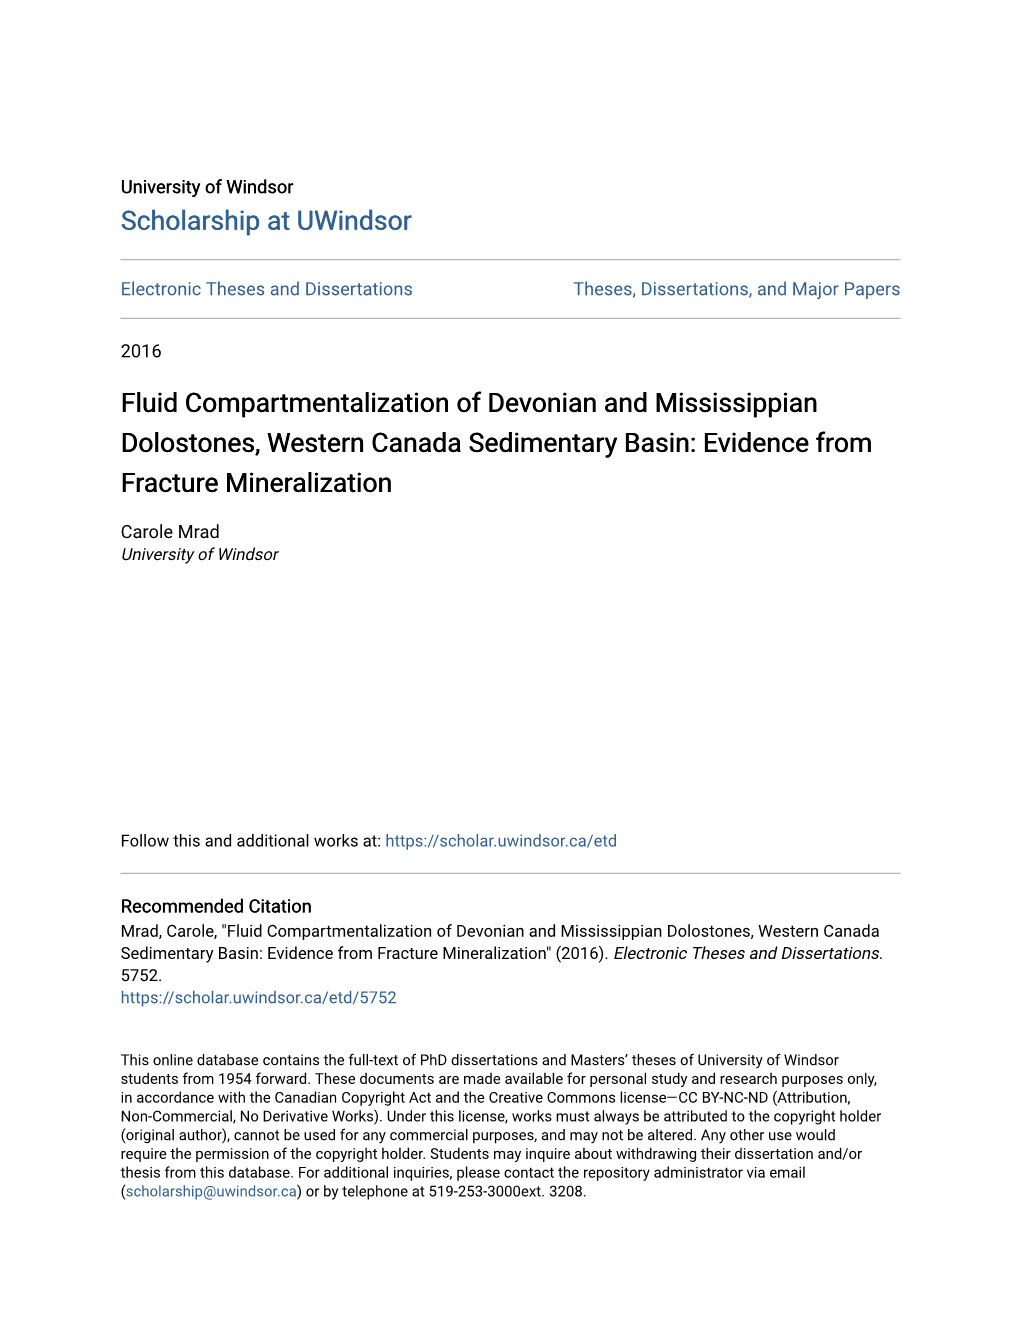 Fluid Compartmentalization of Devonian and Mississippian Dolostones, Western Canada Sedimentary Basin: Evidence from Fracture Mineralization